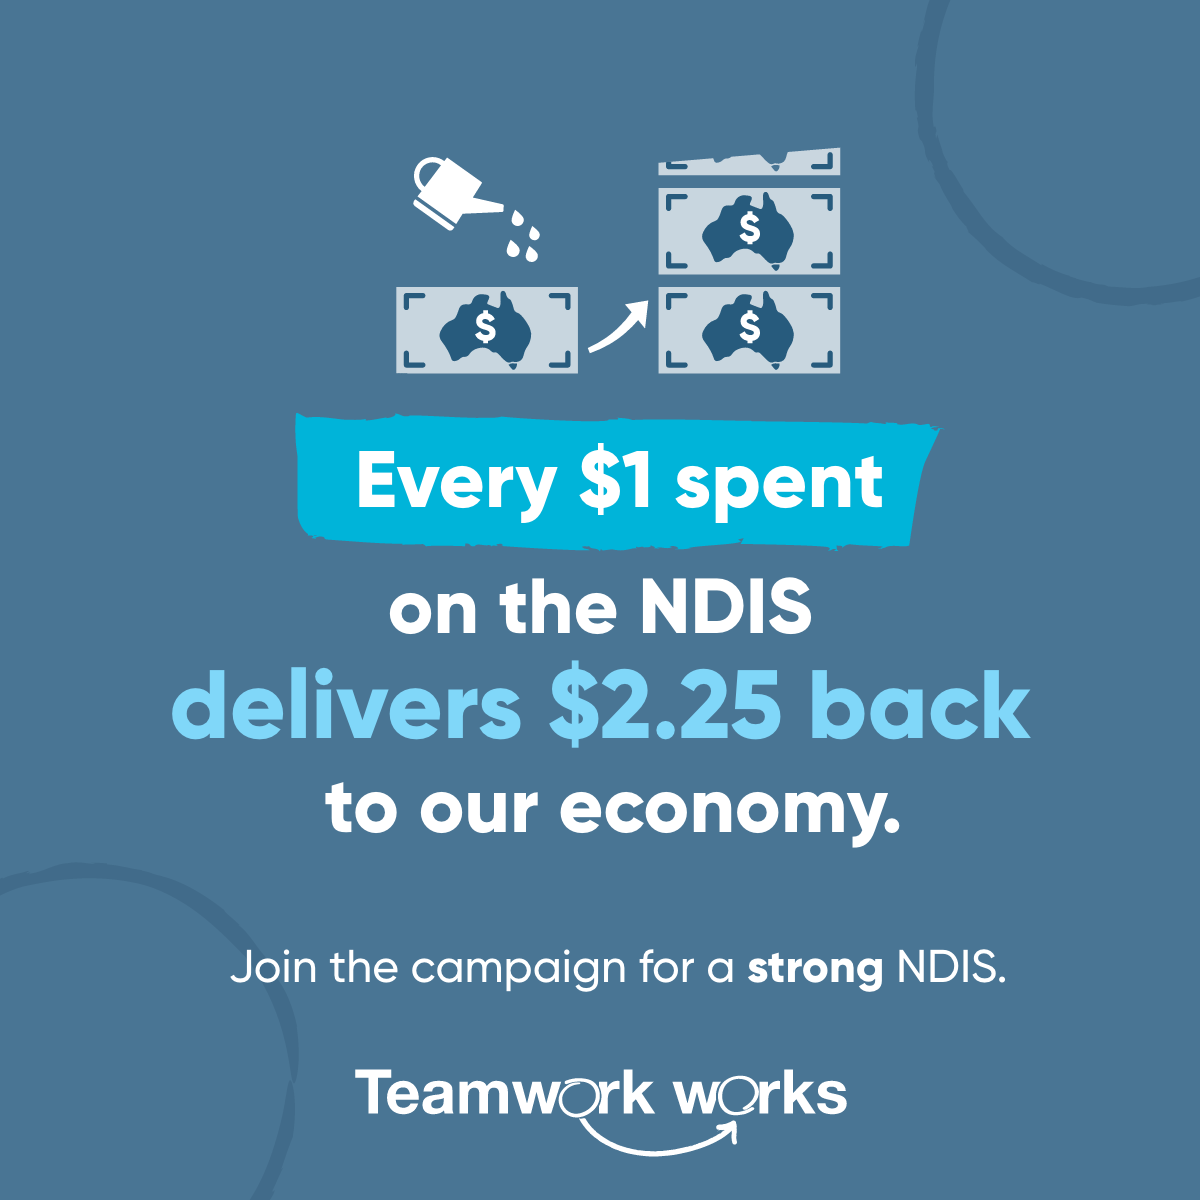 Sharegraphic with text: Every $1 spend on the NDIS delivers $2.25 back to our economy. Join the campaign for a strong NDIS.